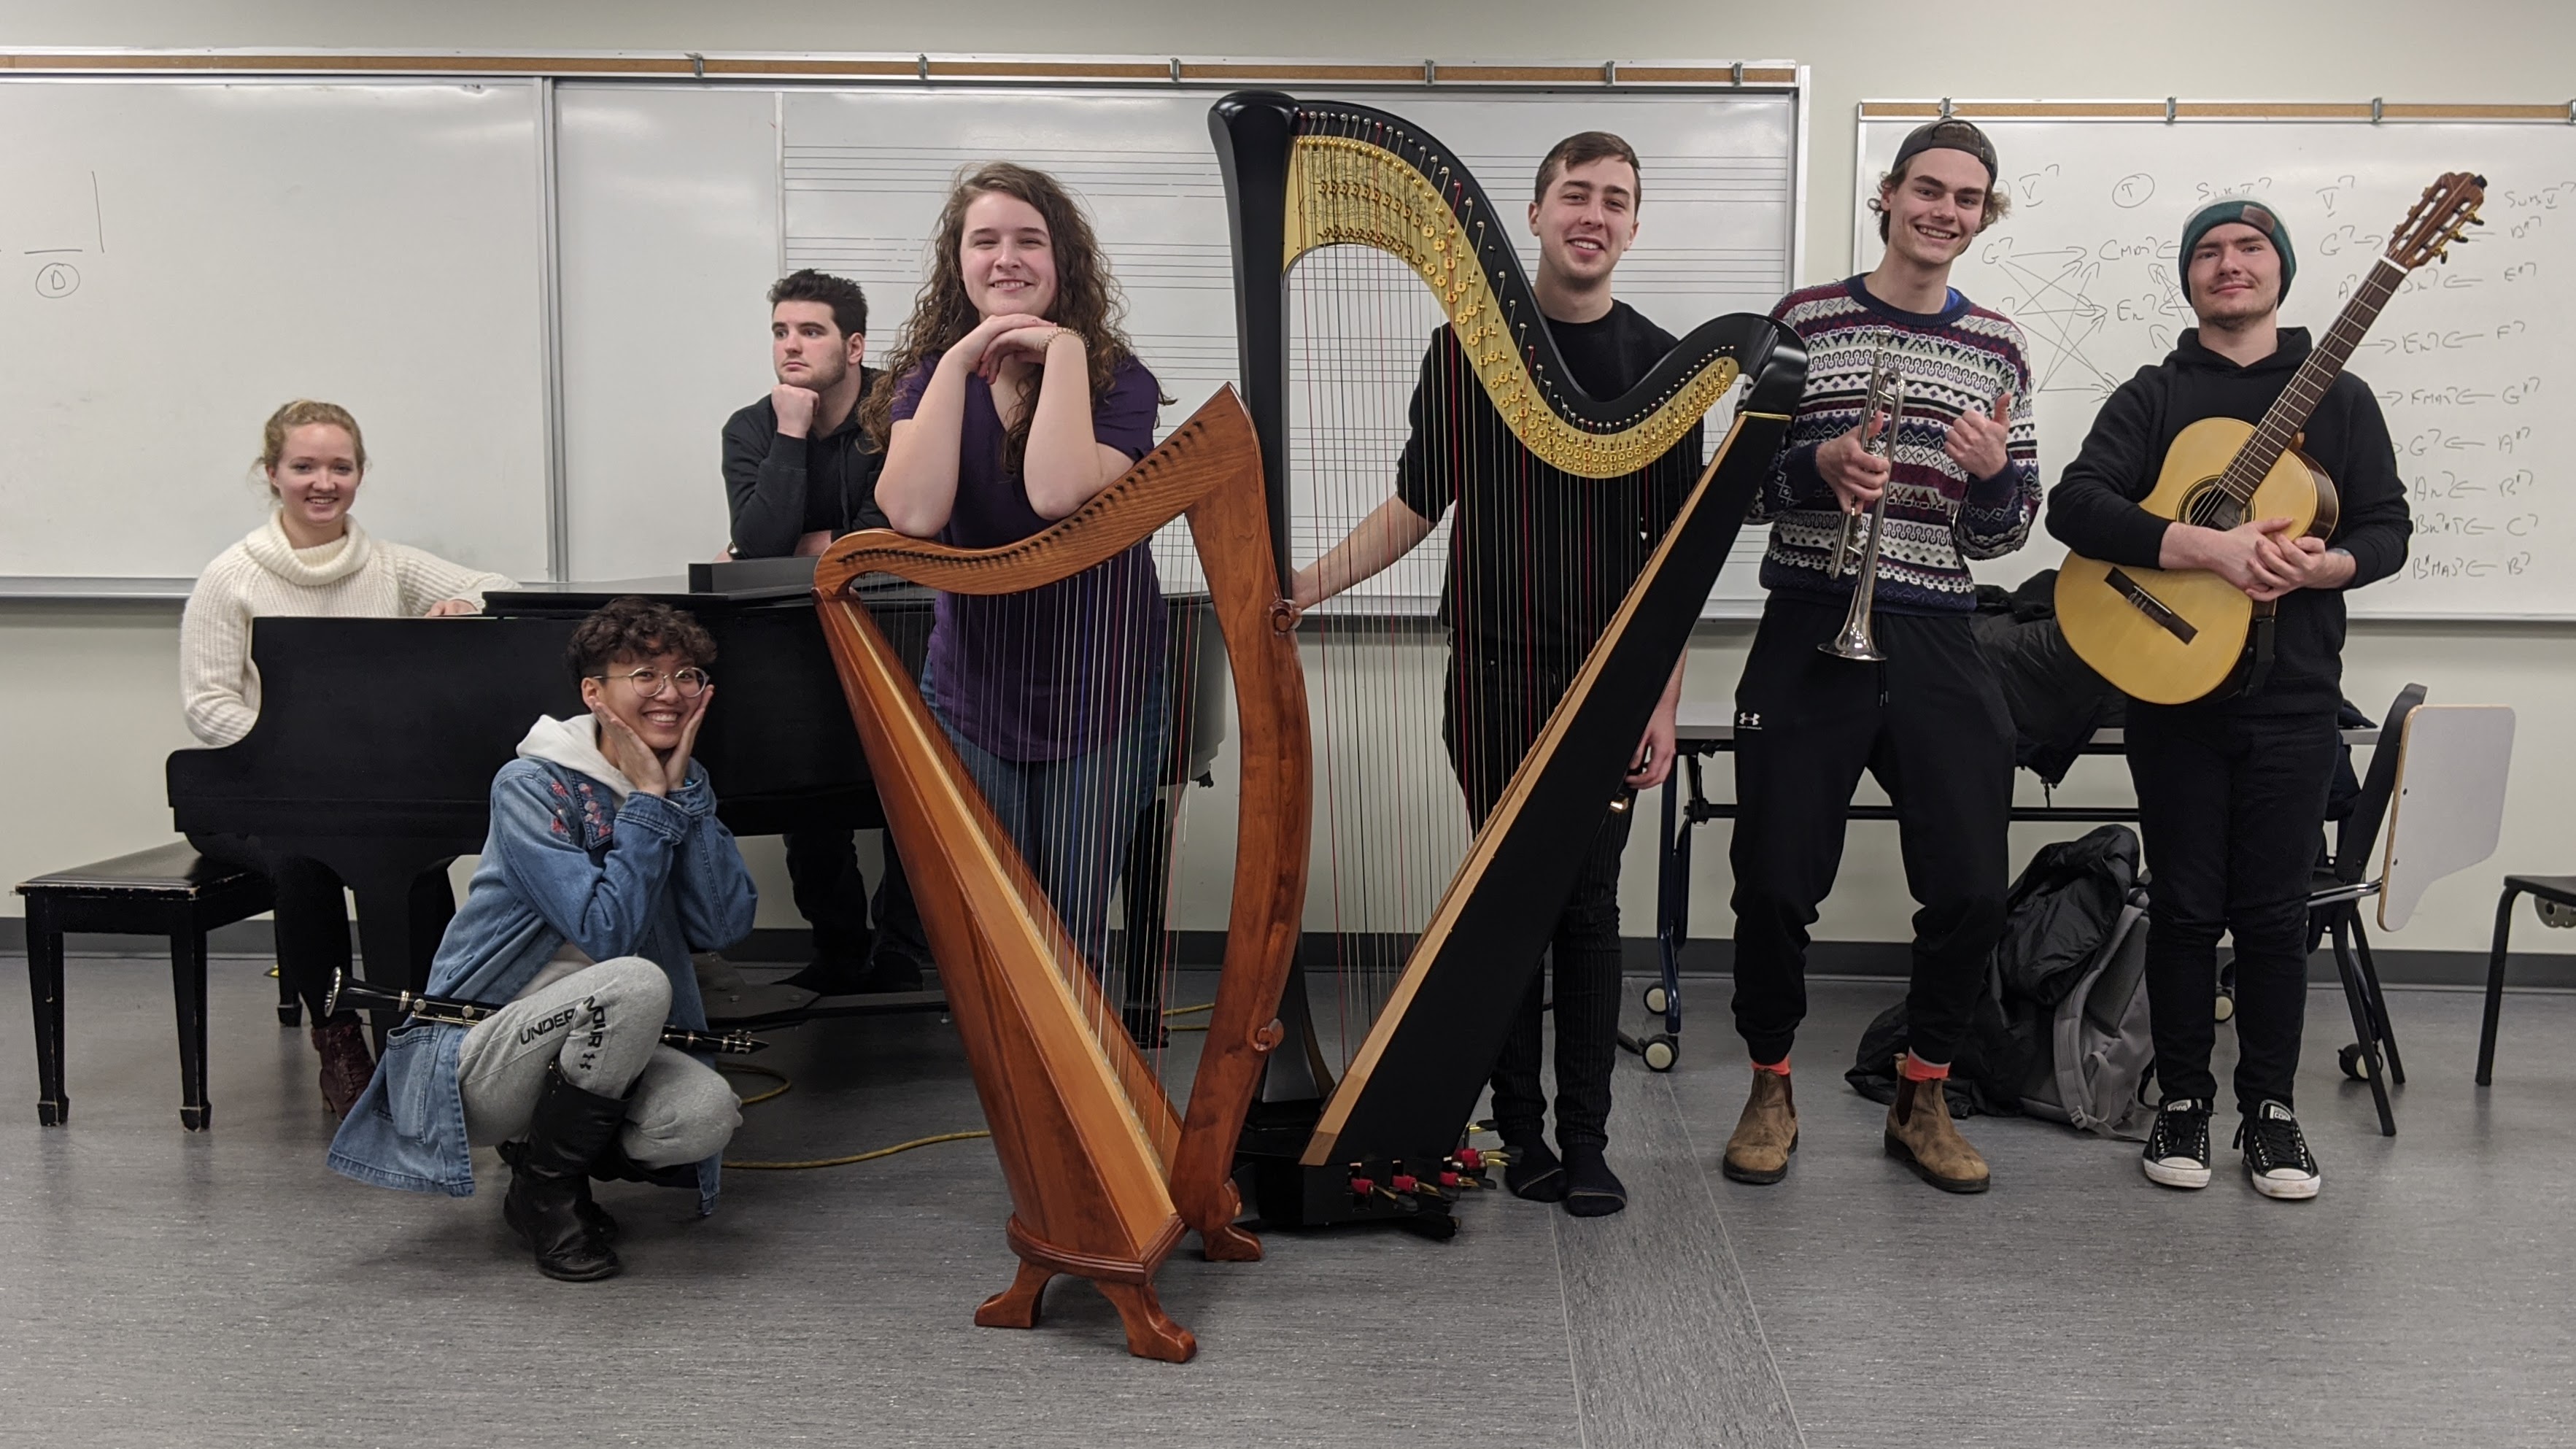 A group photo of the ensemble members of FIRE posing with their instruments in a classroom